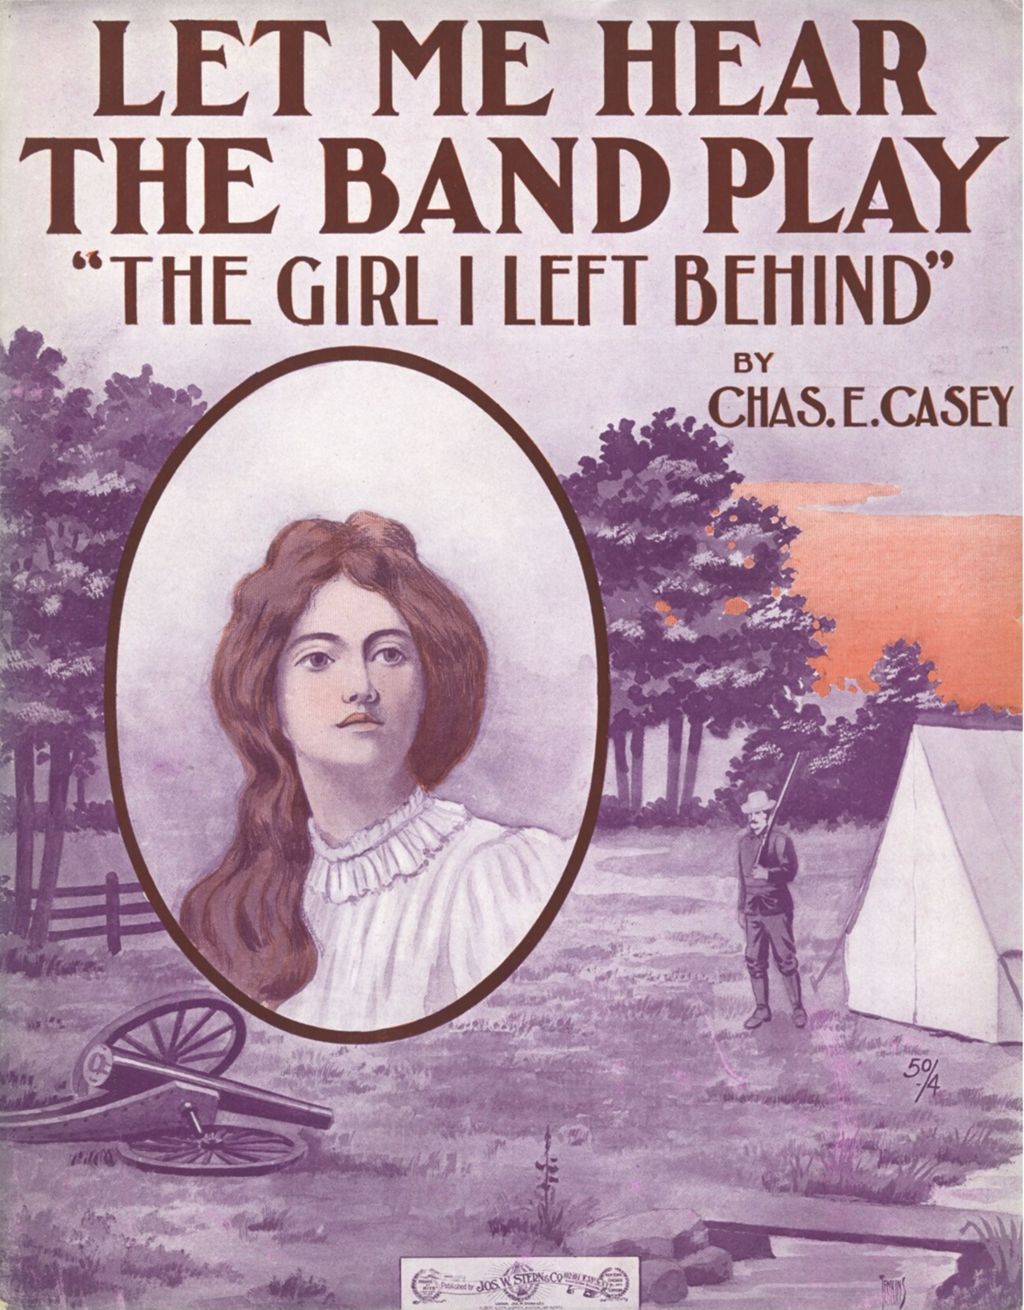 Miniature of Let Me Hear The Band Play "The Girl I Left Behind"